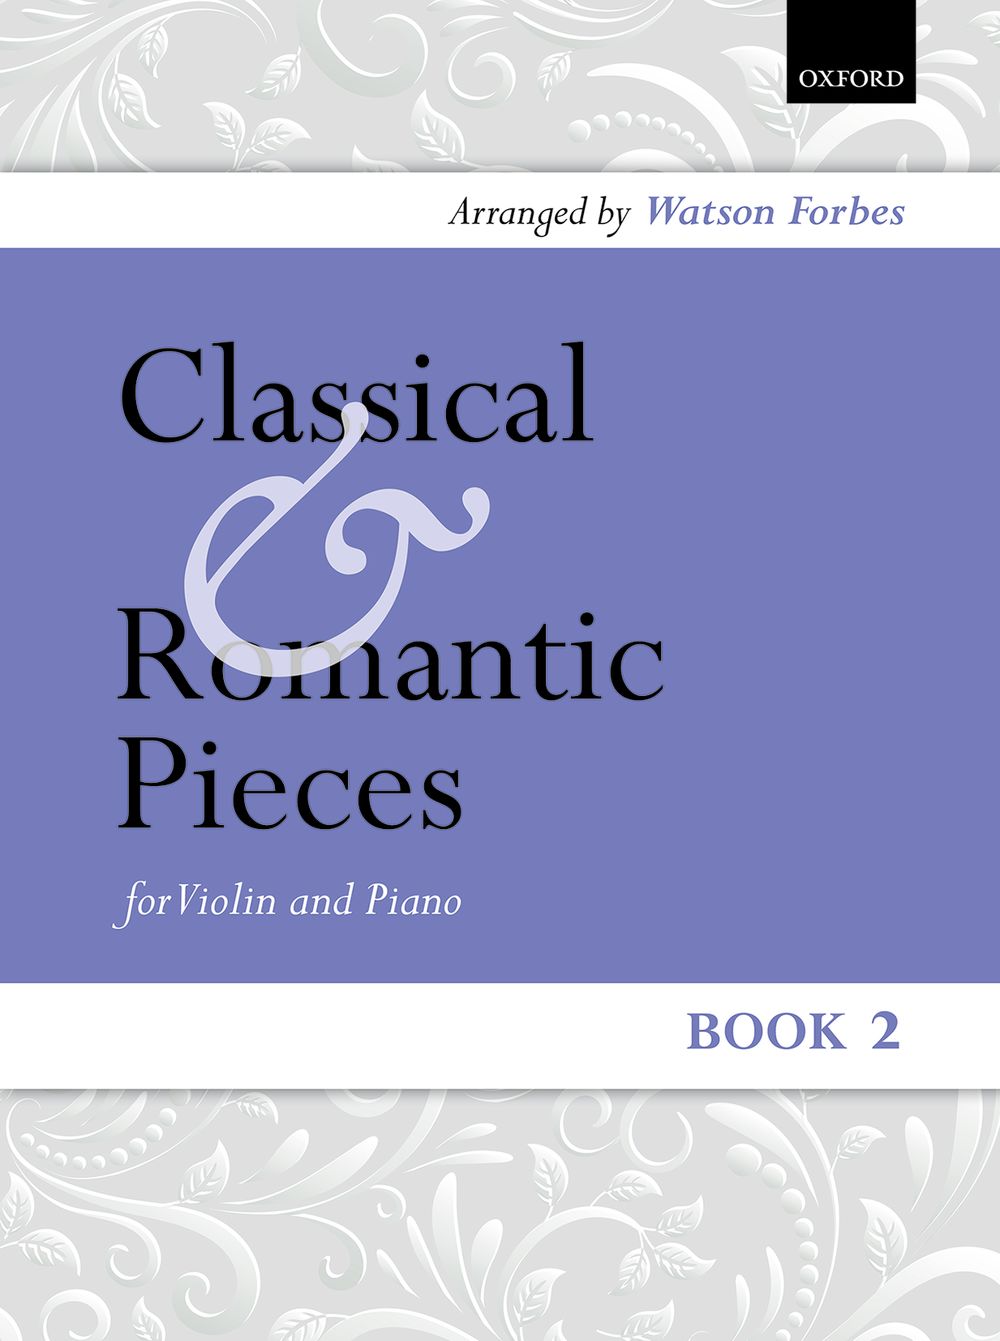 Watson Forbes: Classical and Romantic Pieces for Violin Book 2: Violin: